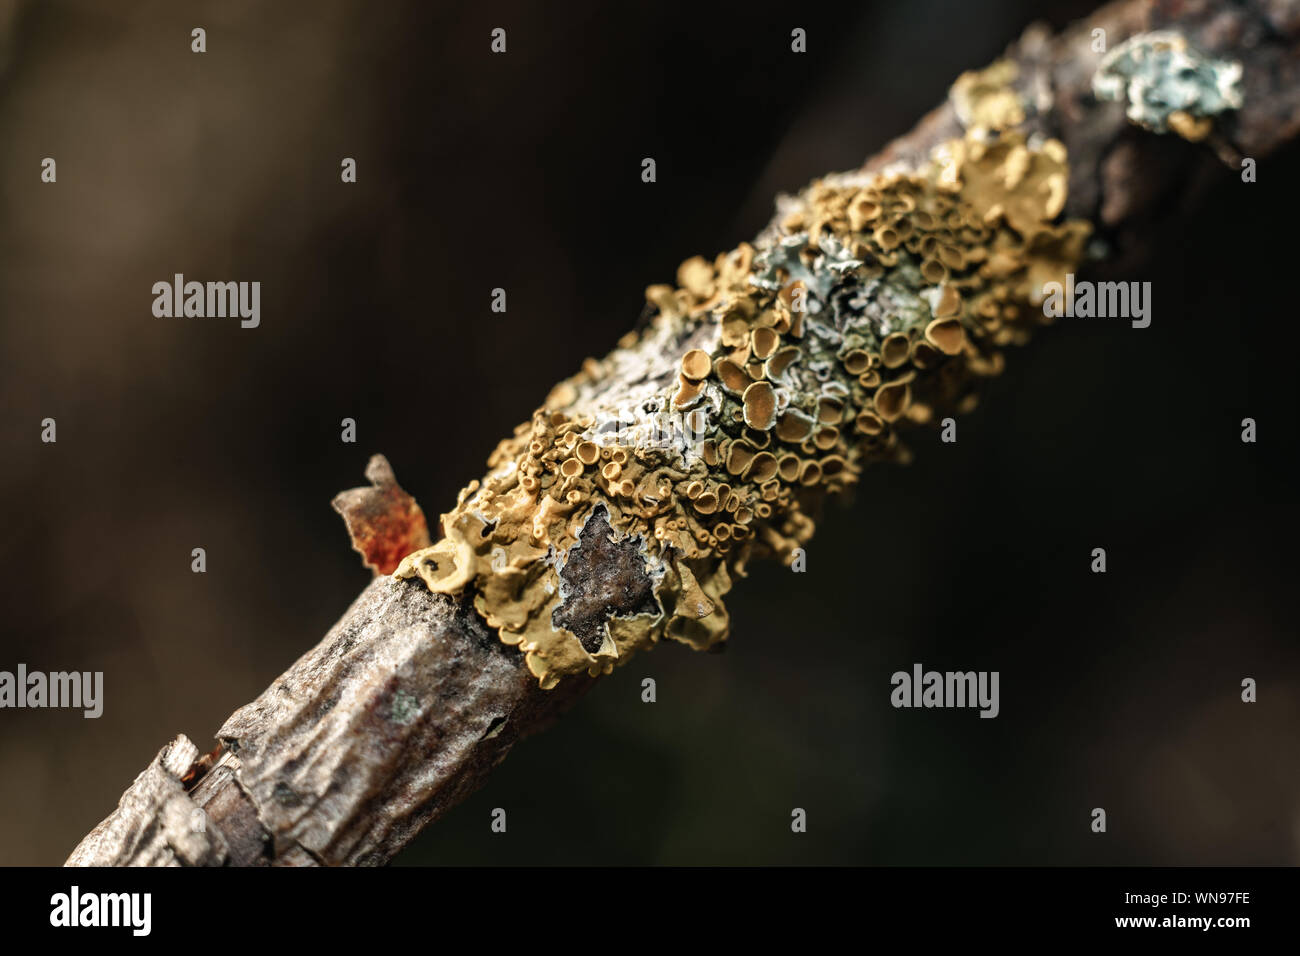 Close up mushroom on a old tree branch background. Macro view. Stock Photo